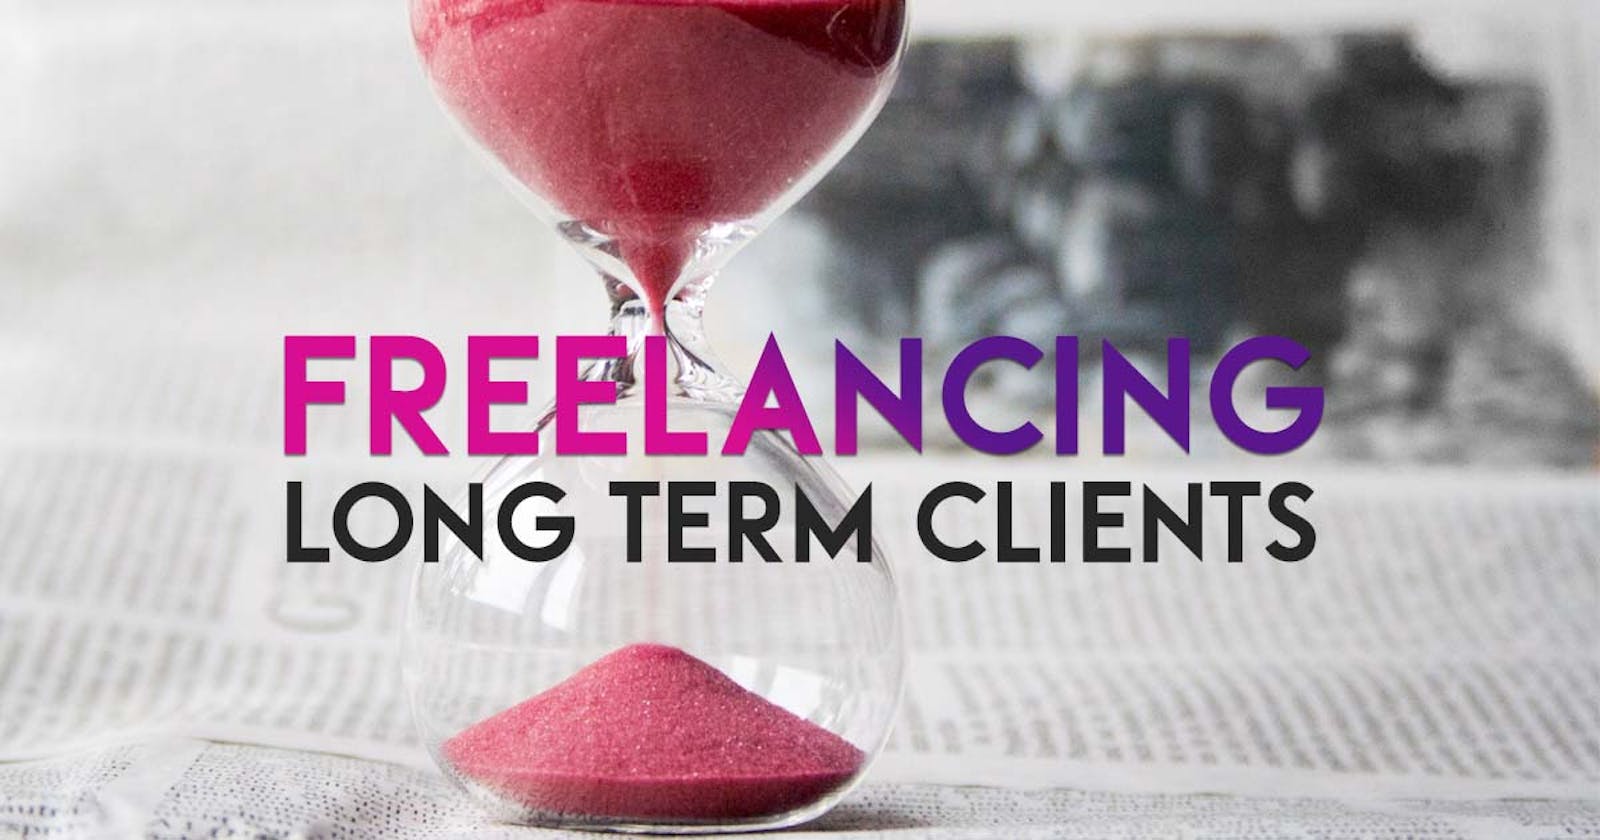 Freelancing – Long Term Clients